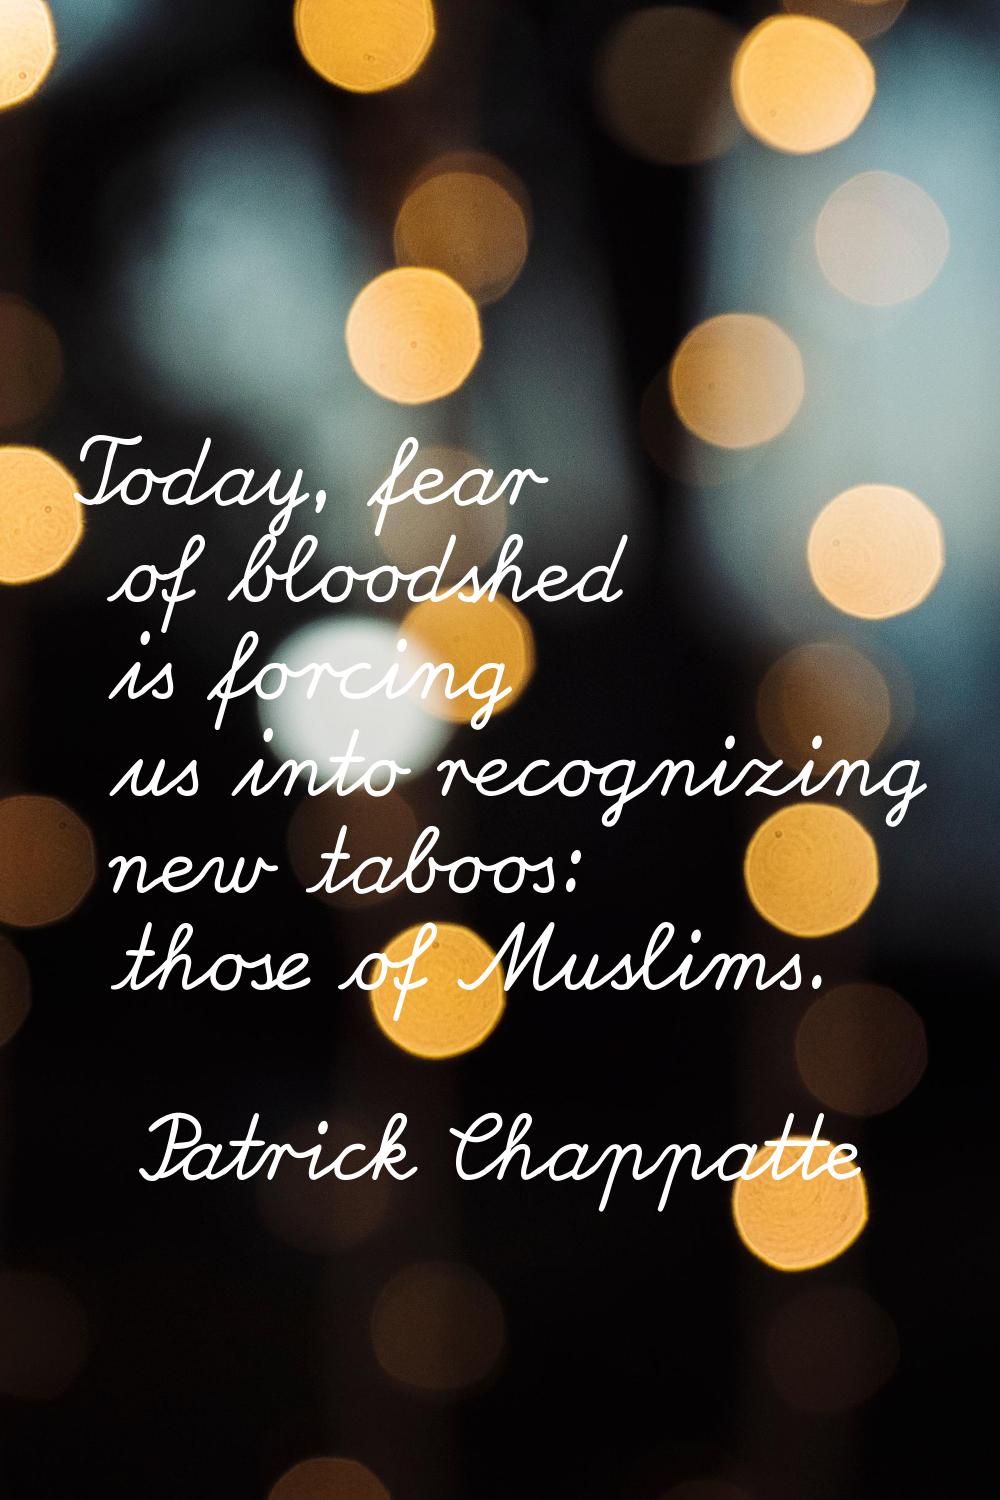 Today, fear of bloodshed is forcing us into recognizing new taboos: those of Muslims.